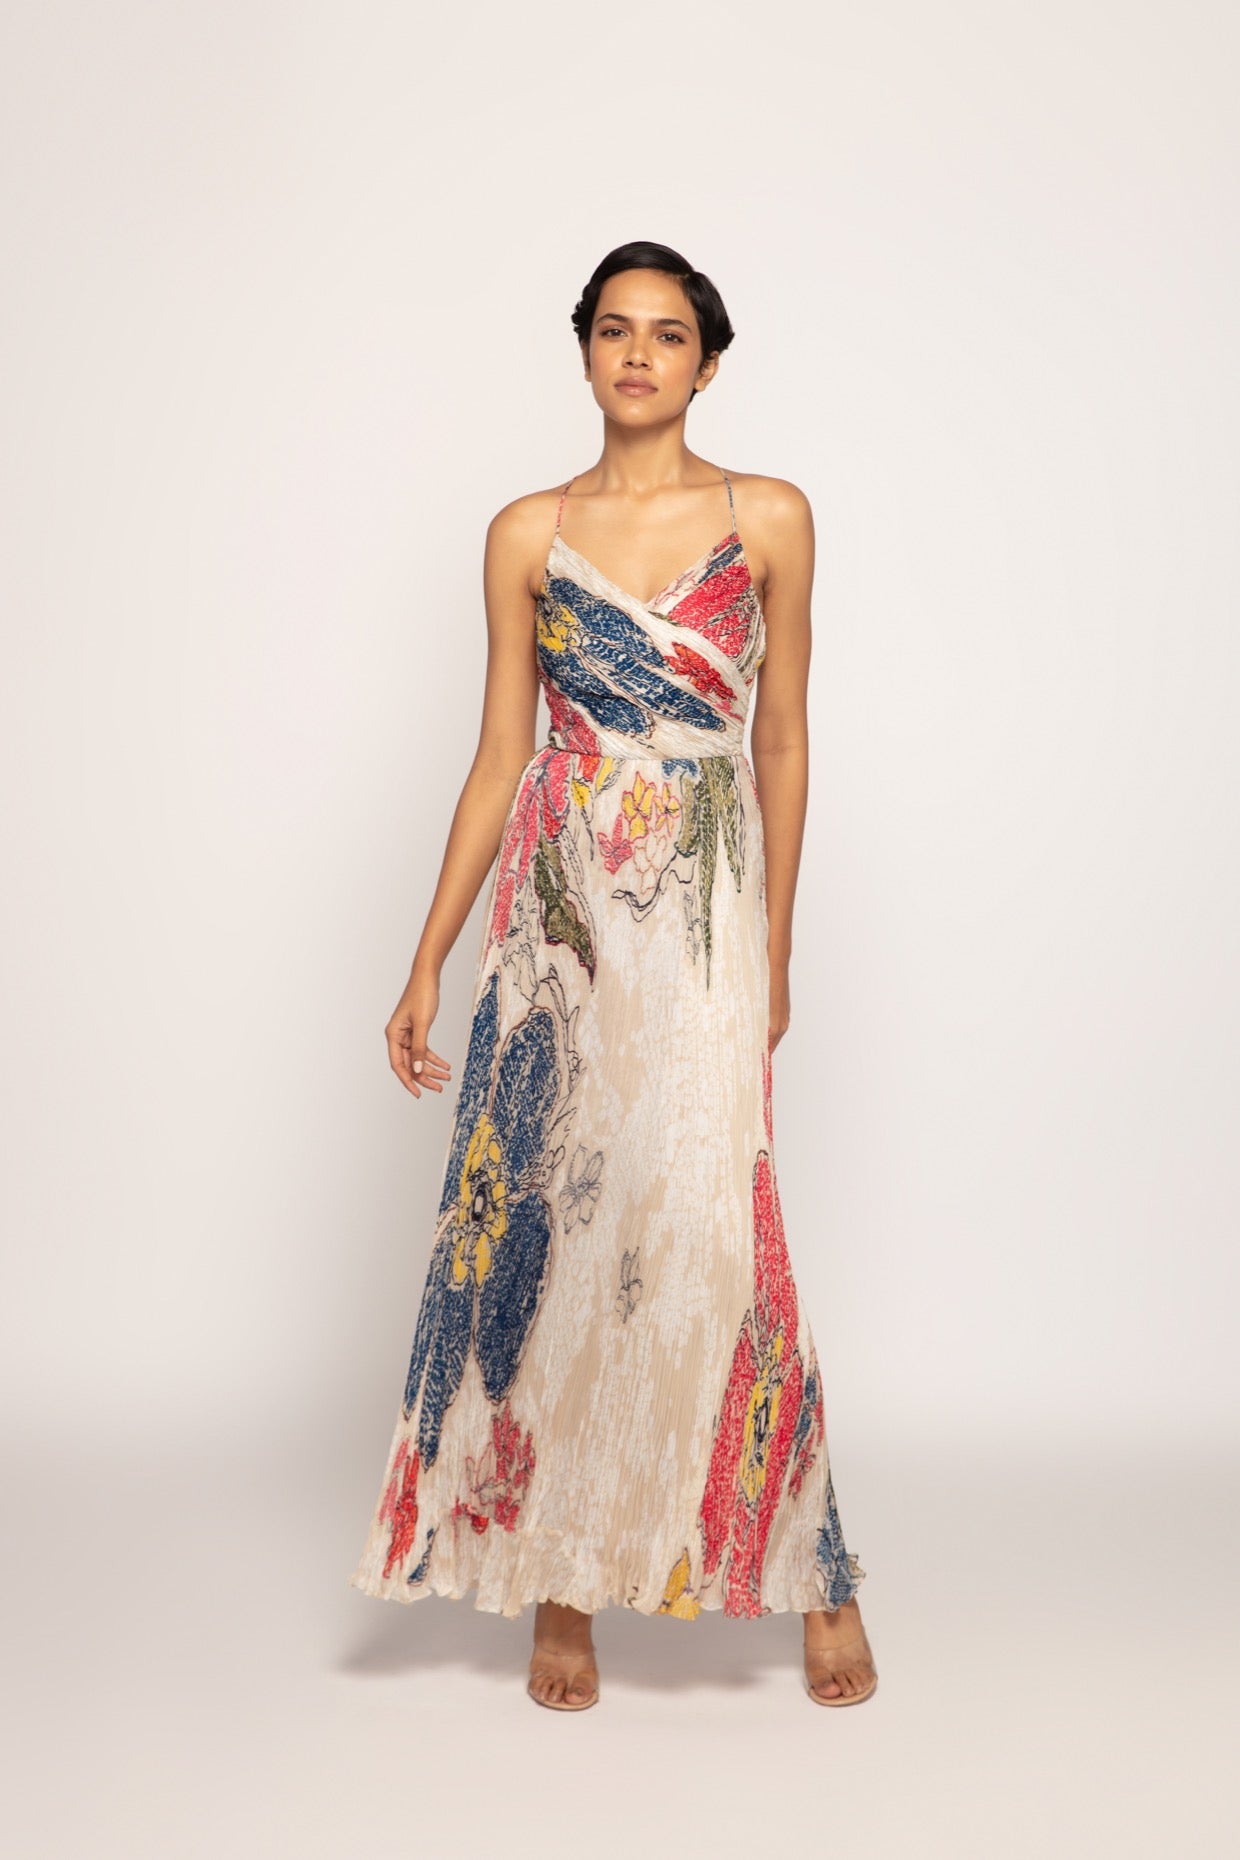 Periwinkle Bandhani Print, Hand Micro Pleated Cross Over Bustier Maxi Dress